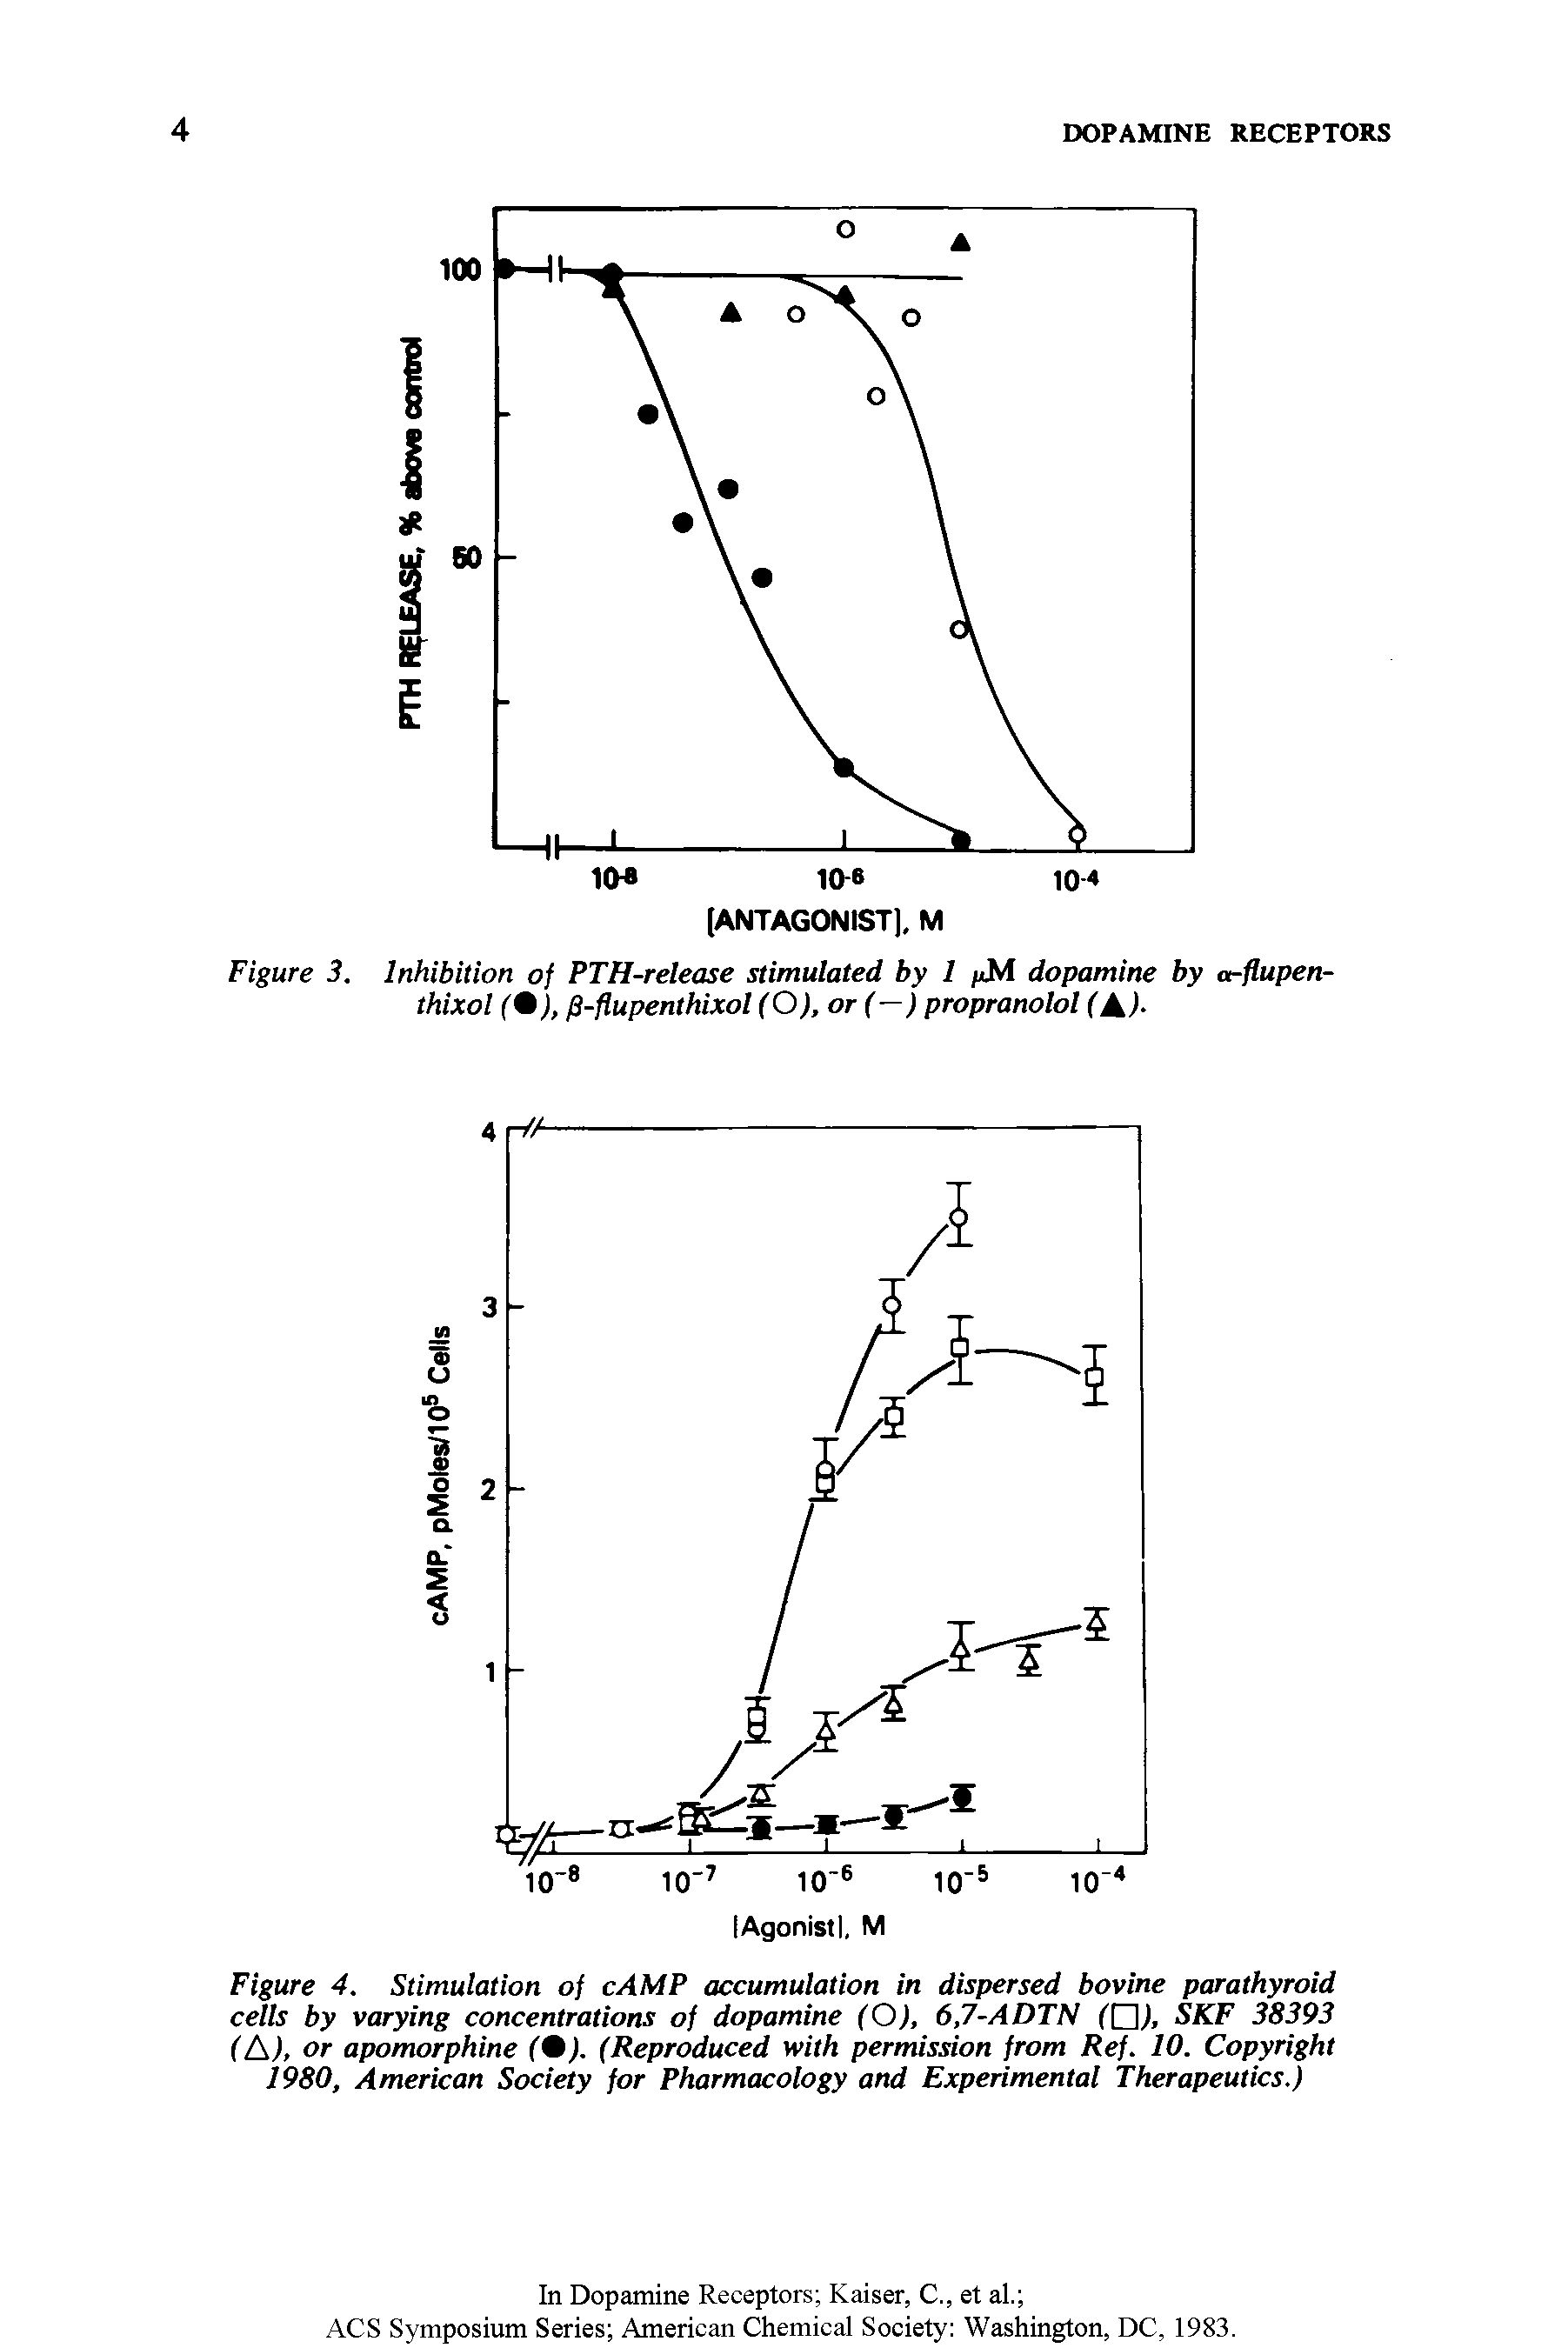 Figure 4. Stimulation of cAMP accumulation in dispersed bovine parathyroid cells by varying concentrations of dopamine (O), 6,7-ADTN (Cl), SKF 38393 (A), or apomorphine (9). (Reproduced with permission from Ref. 10. Copyright 1980, American Society for Pharmacology and Experimental Therapeutics.)...